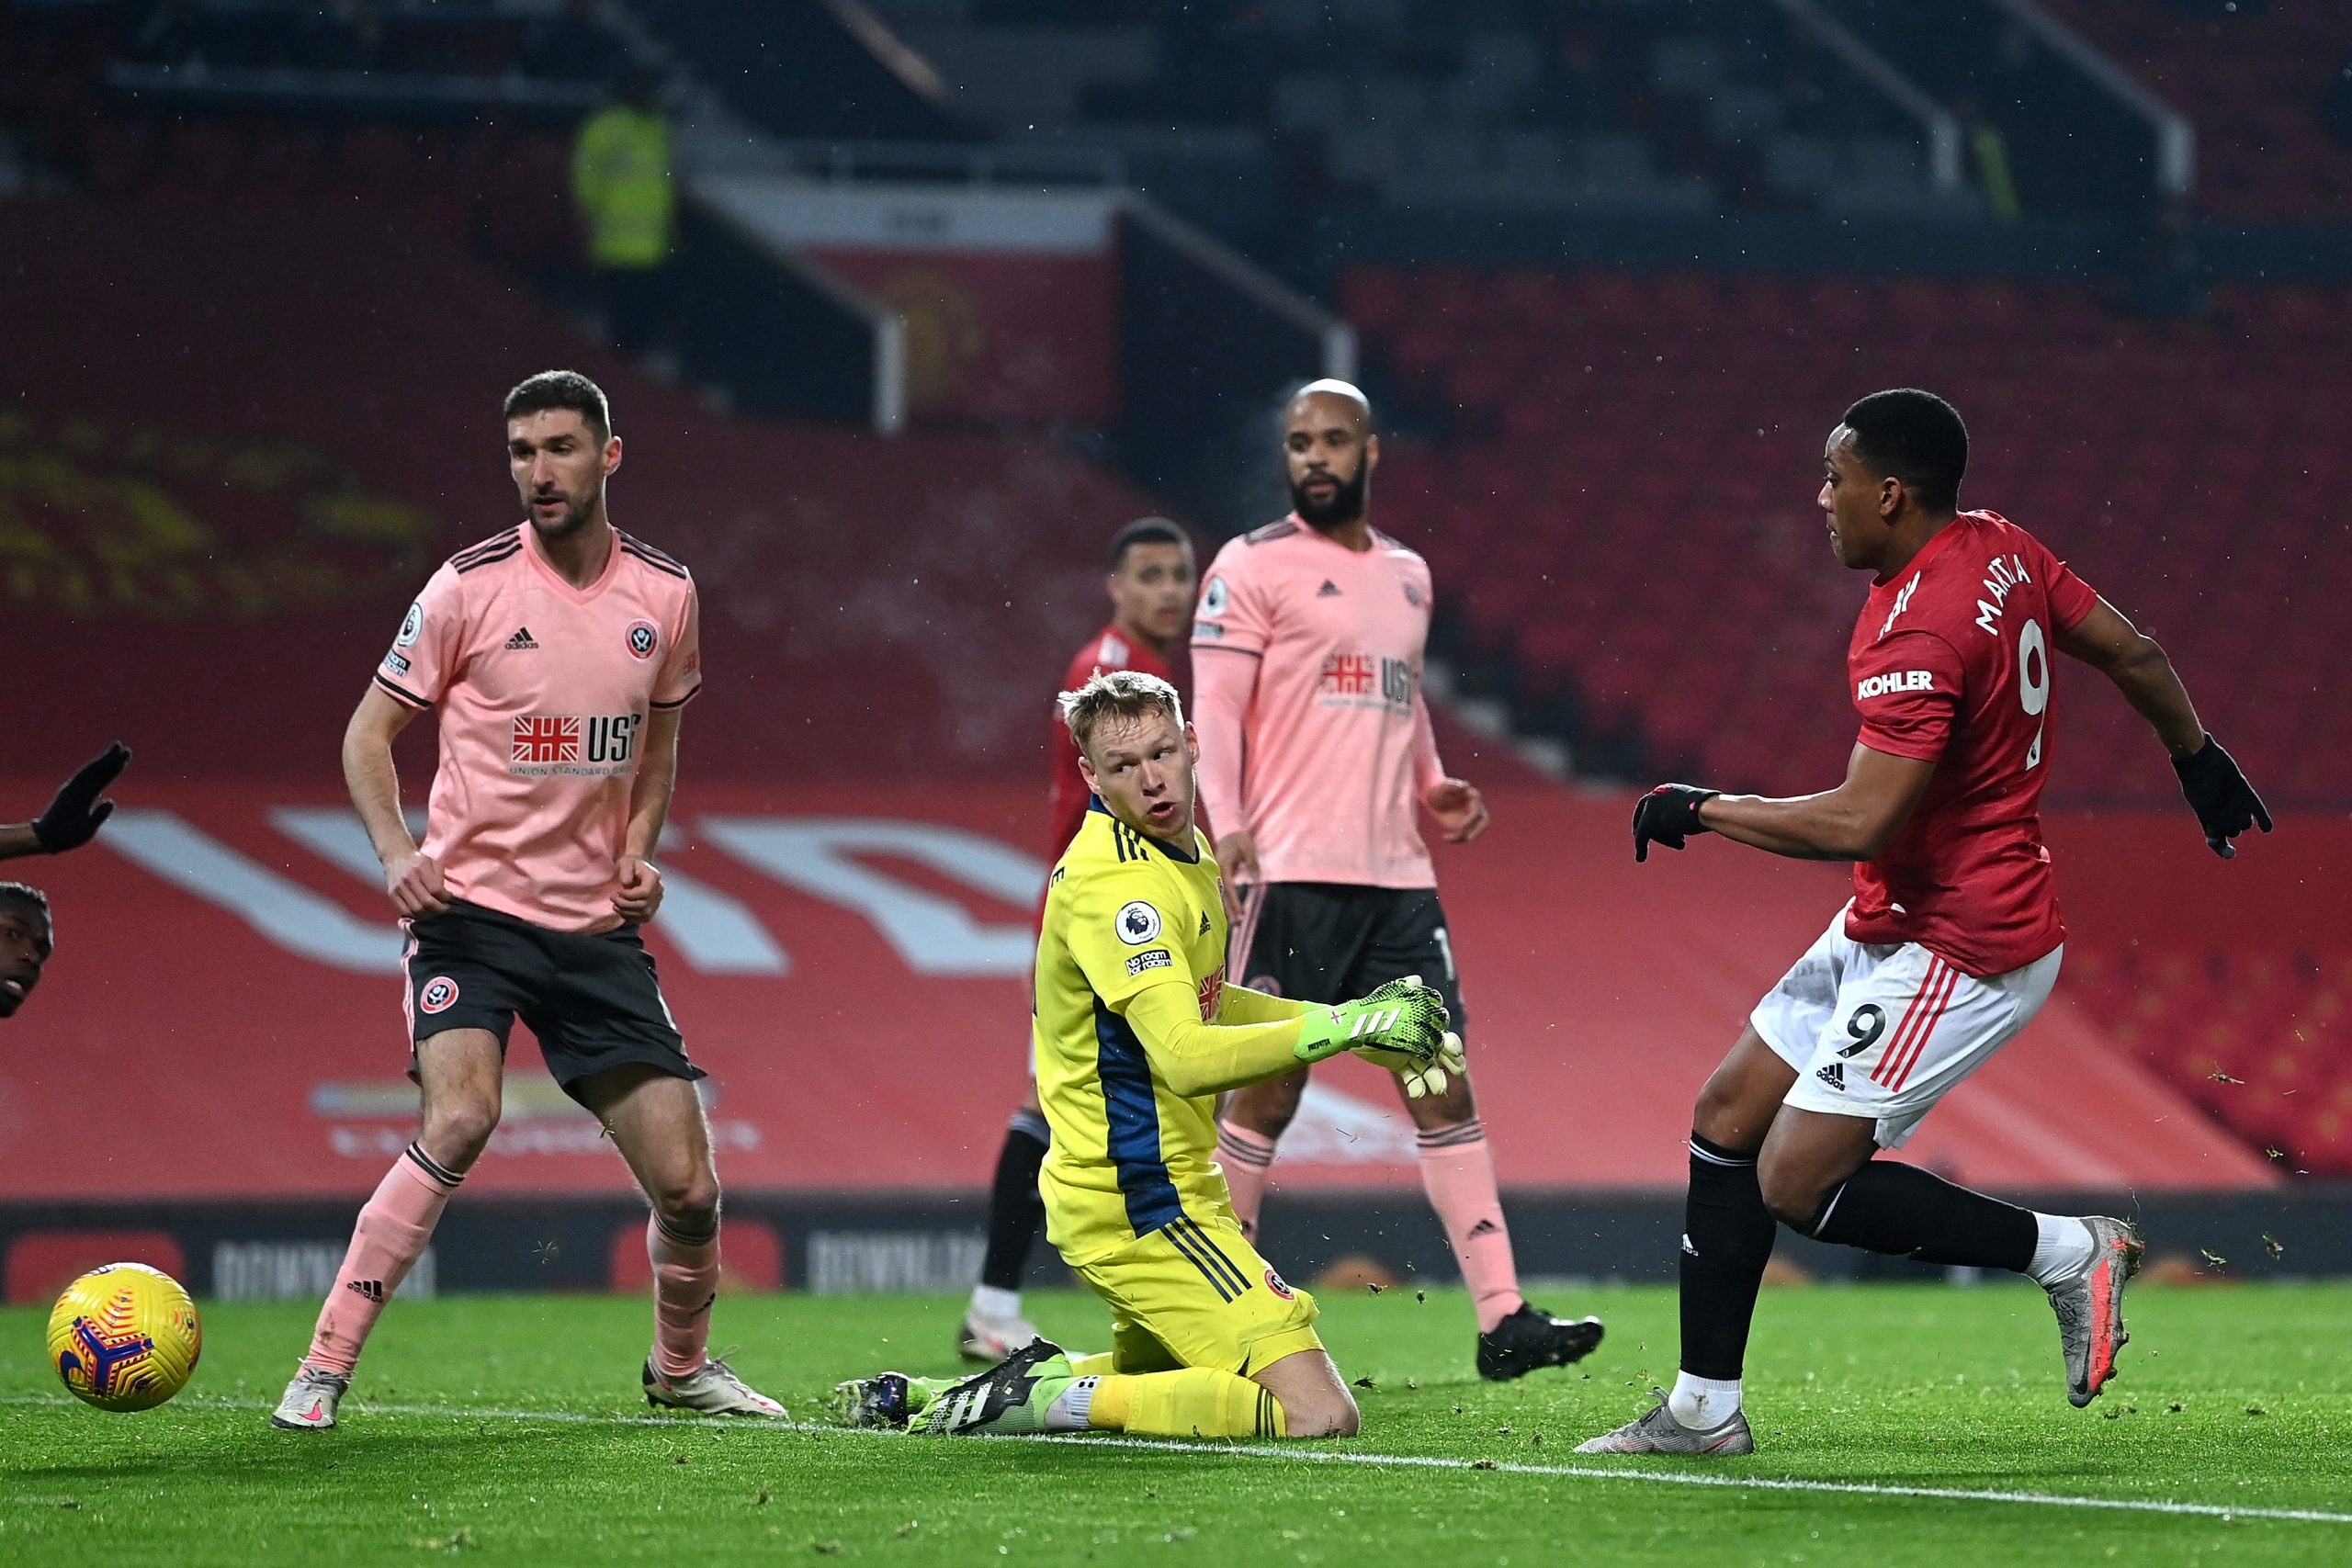 Anthony Martial had a goal disallowed against Sheffield United. (GETTY Images)